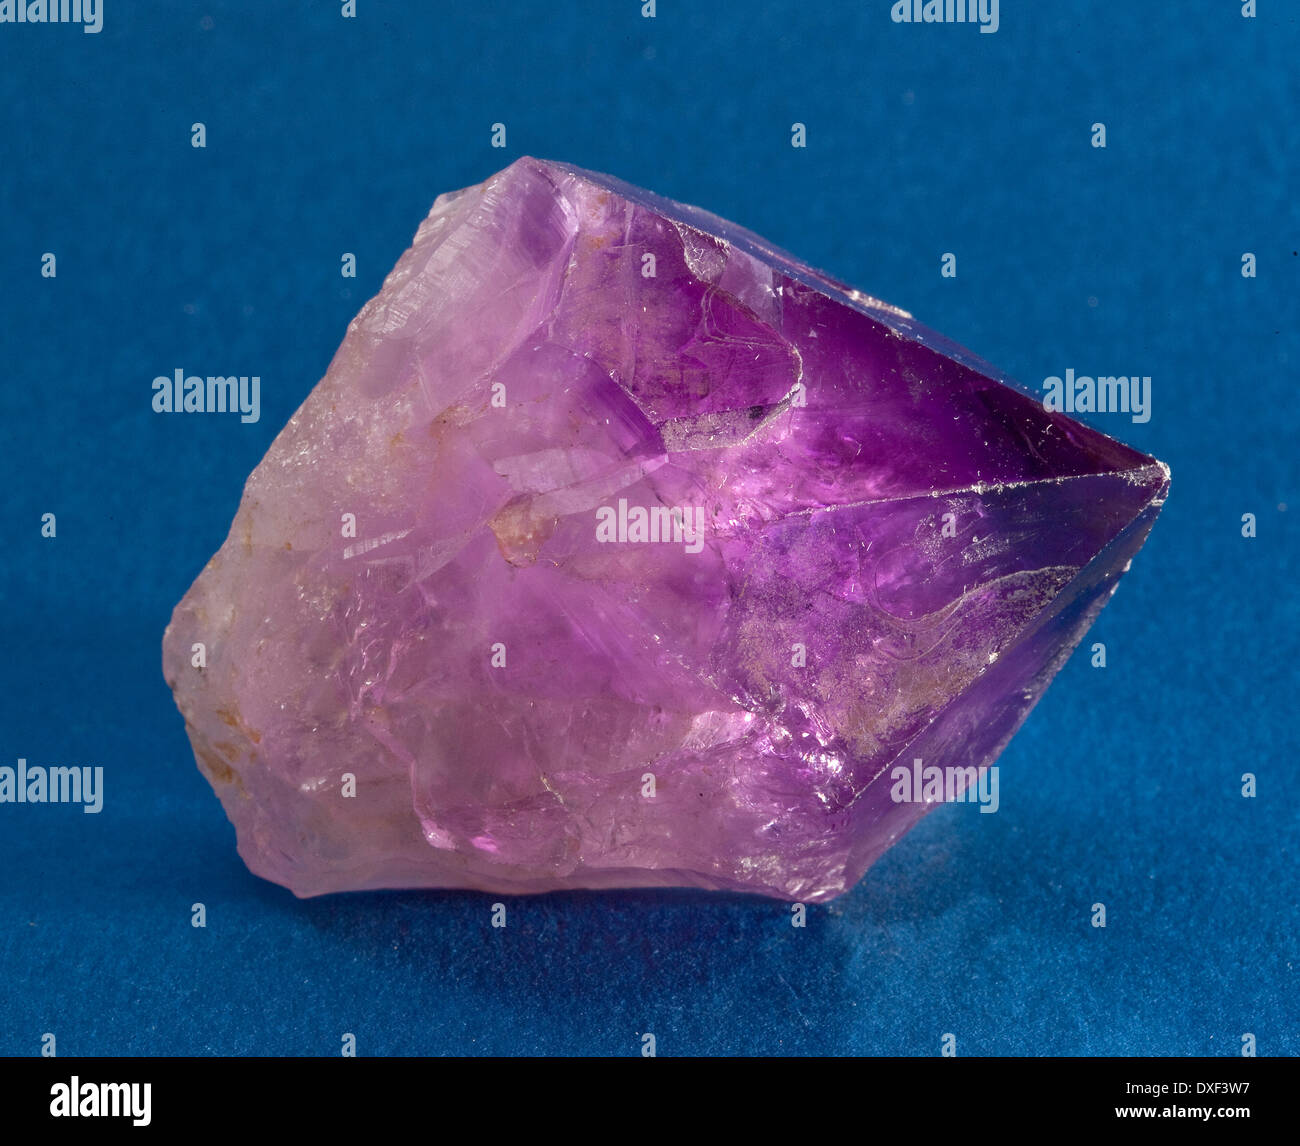 Sample of a Quartz Amethyst crystal from the island of Mull. Stock Photo